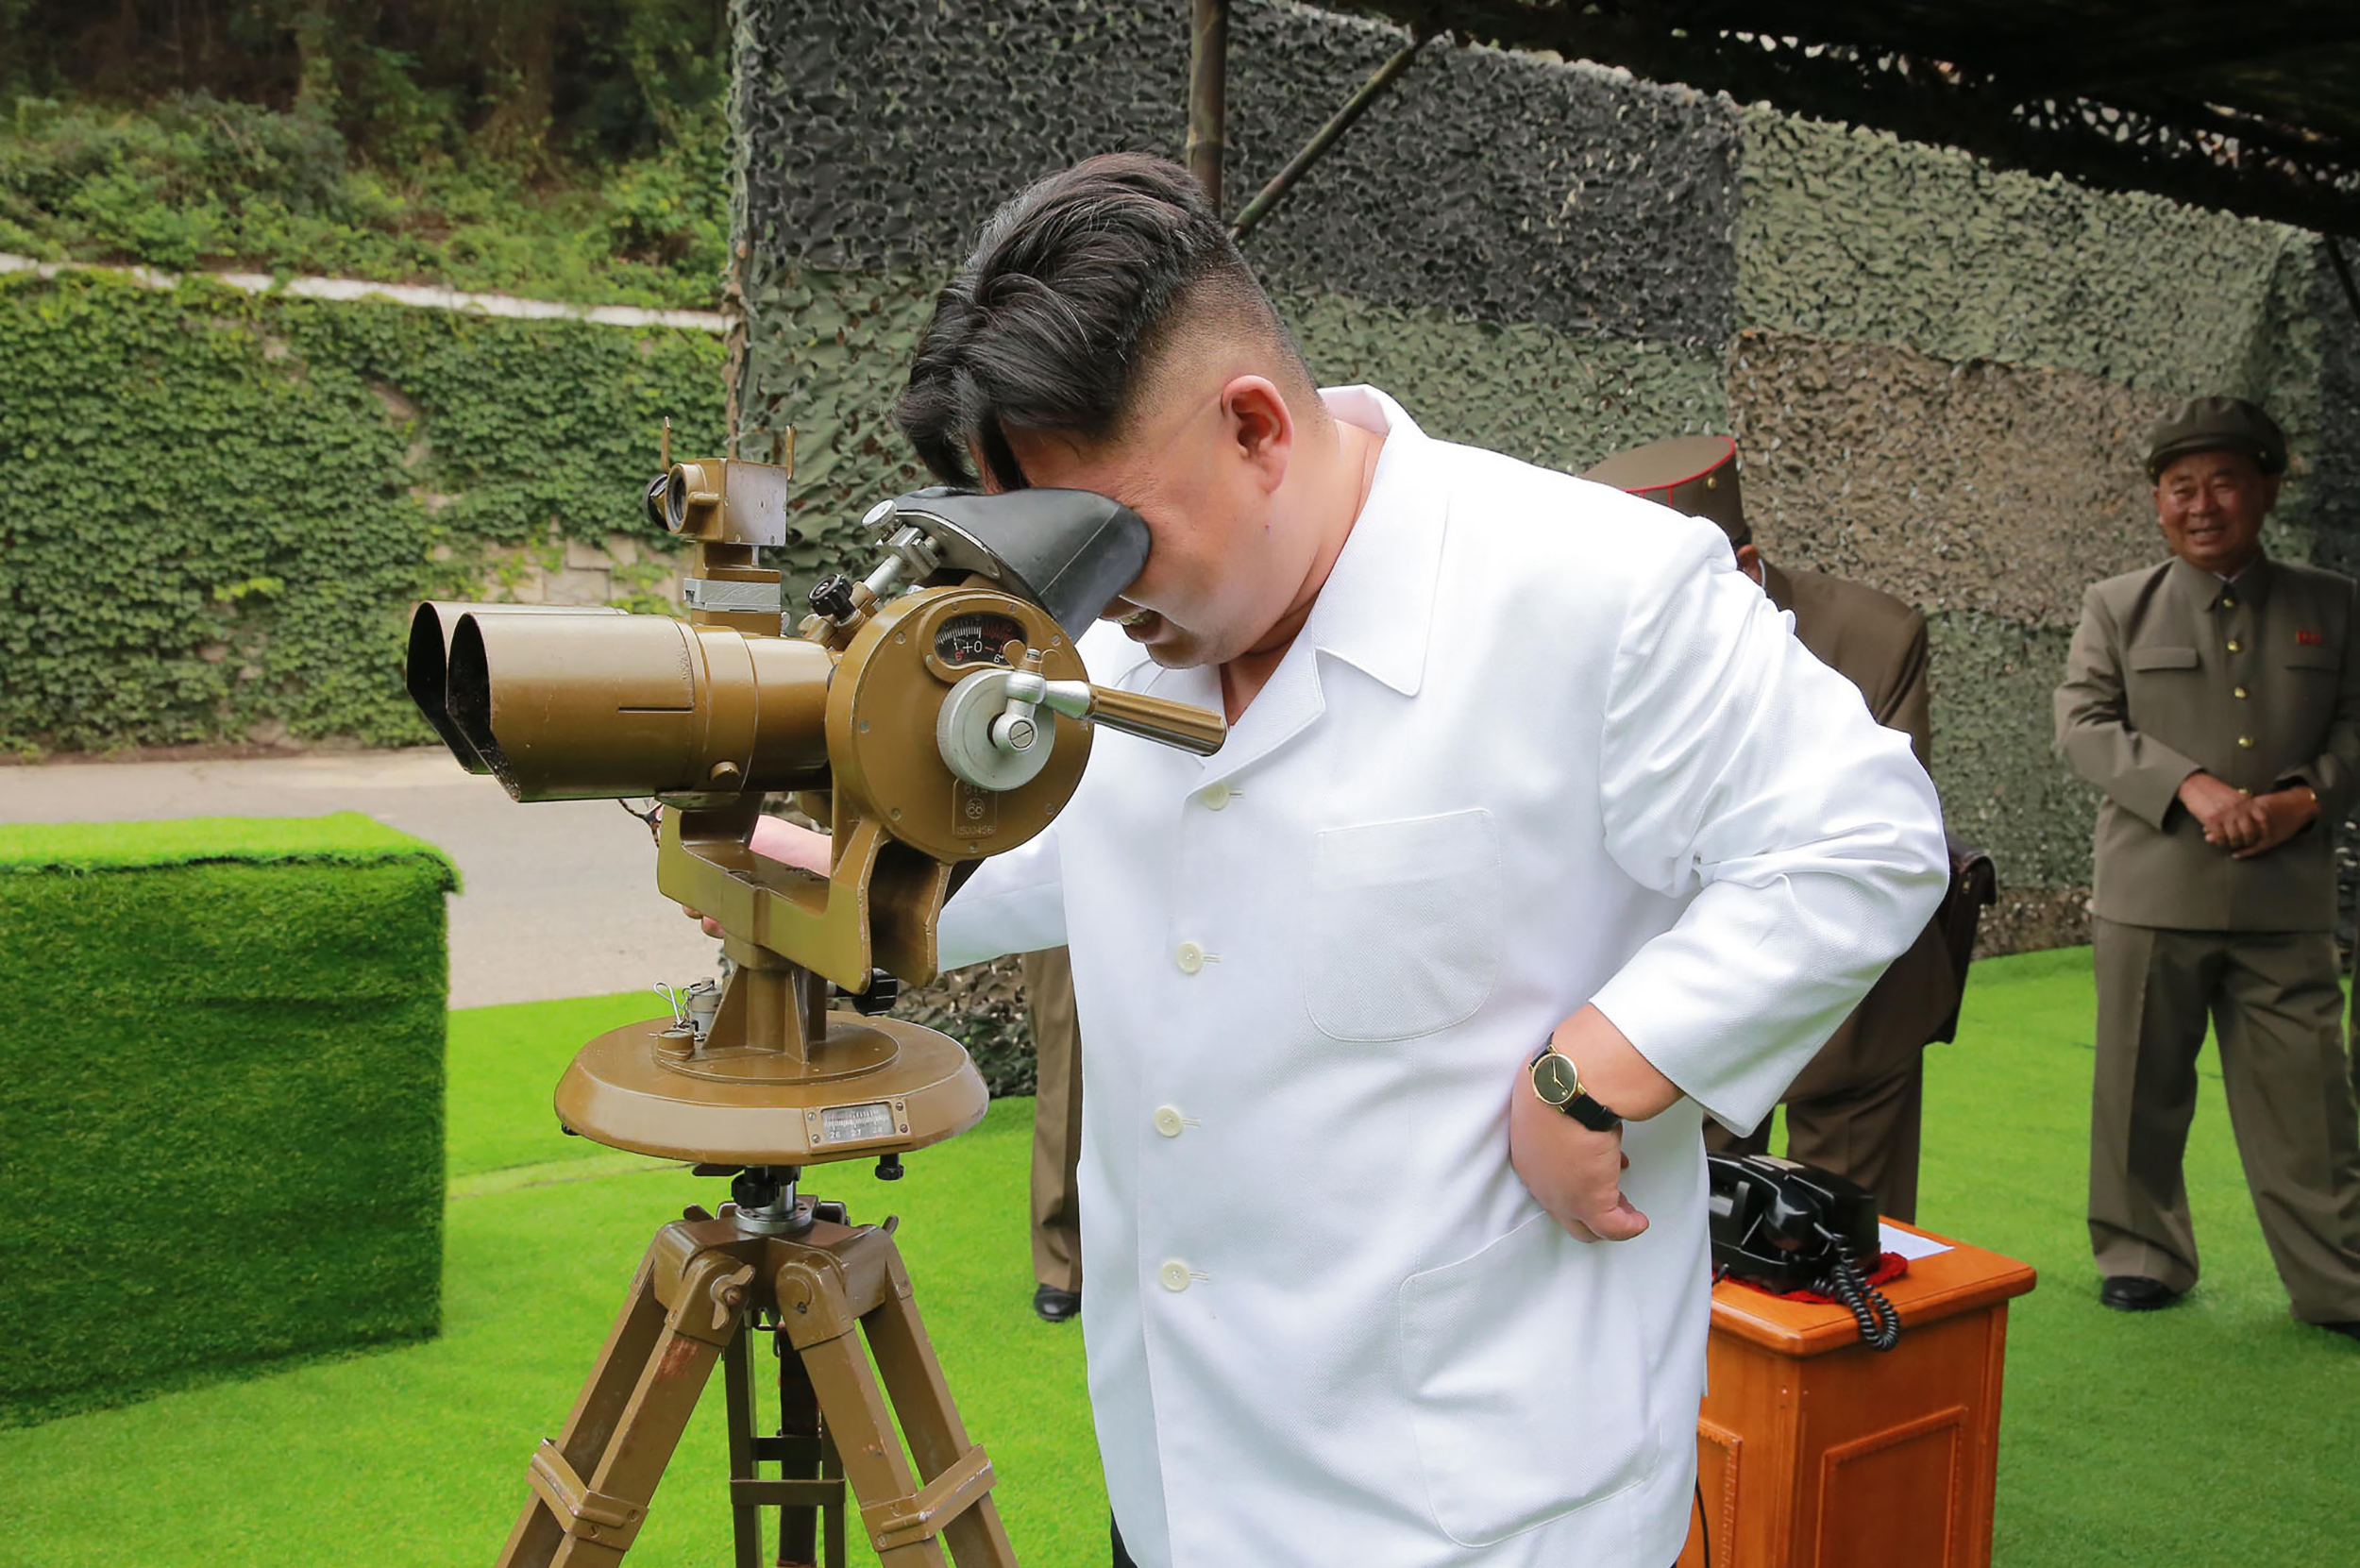 This undated picture released from North Korea's official Korean Central News Agency (KCNA) on September 6, 2016 shows North Korean leader Kim Jong-Un inspecting the fire drill of ballistic rockets by Hwasong artillery units of the KPA Strategic Force at an undisclosed location in North Korea. / AFP PHOTO / KCNA VIA KNS / KCNA /  - South Korea OUT / REPUBLIC OF KOREA OUT   ---EDITORS NOTE--- RESTRICTED TO EDITORIAL USE - MANDATORY CREDIT "AFP PHOTO/KCNA VIA KNS" - NO MARKETING NO ADVERTISING CAMPAIGNS - DISTRIBUTED AS A SERVICE TO CLIENTS THIS PICTURE WAS MADE AVAILABLE BY A THIRD PARTY. AFP CAN NOT INDEPENDENTLY VERIFY THE AUTHENTICITY, LOCATION, DATE AND CONTENT OF THIS IMAGE. THIS PHOTO IS DISTRIBUTED EXACTLY AS RECEIVED BY AFP.  /